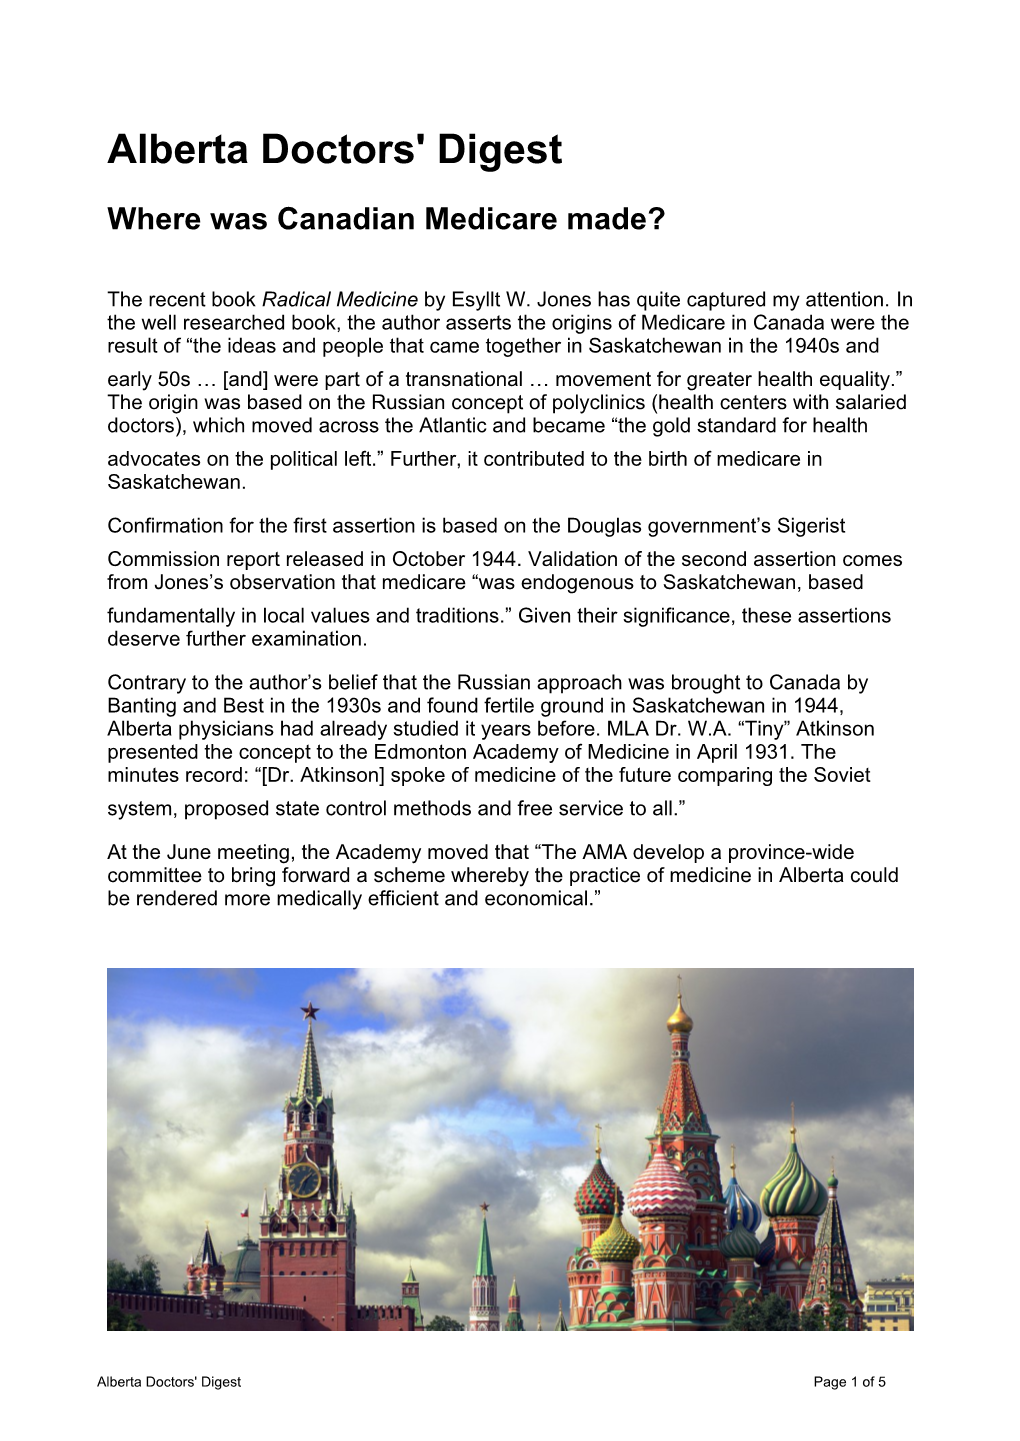 Where Was Canadian Medicare Made? | Alberta Doctors' Digest